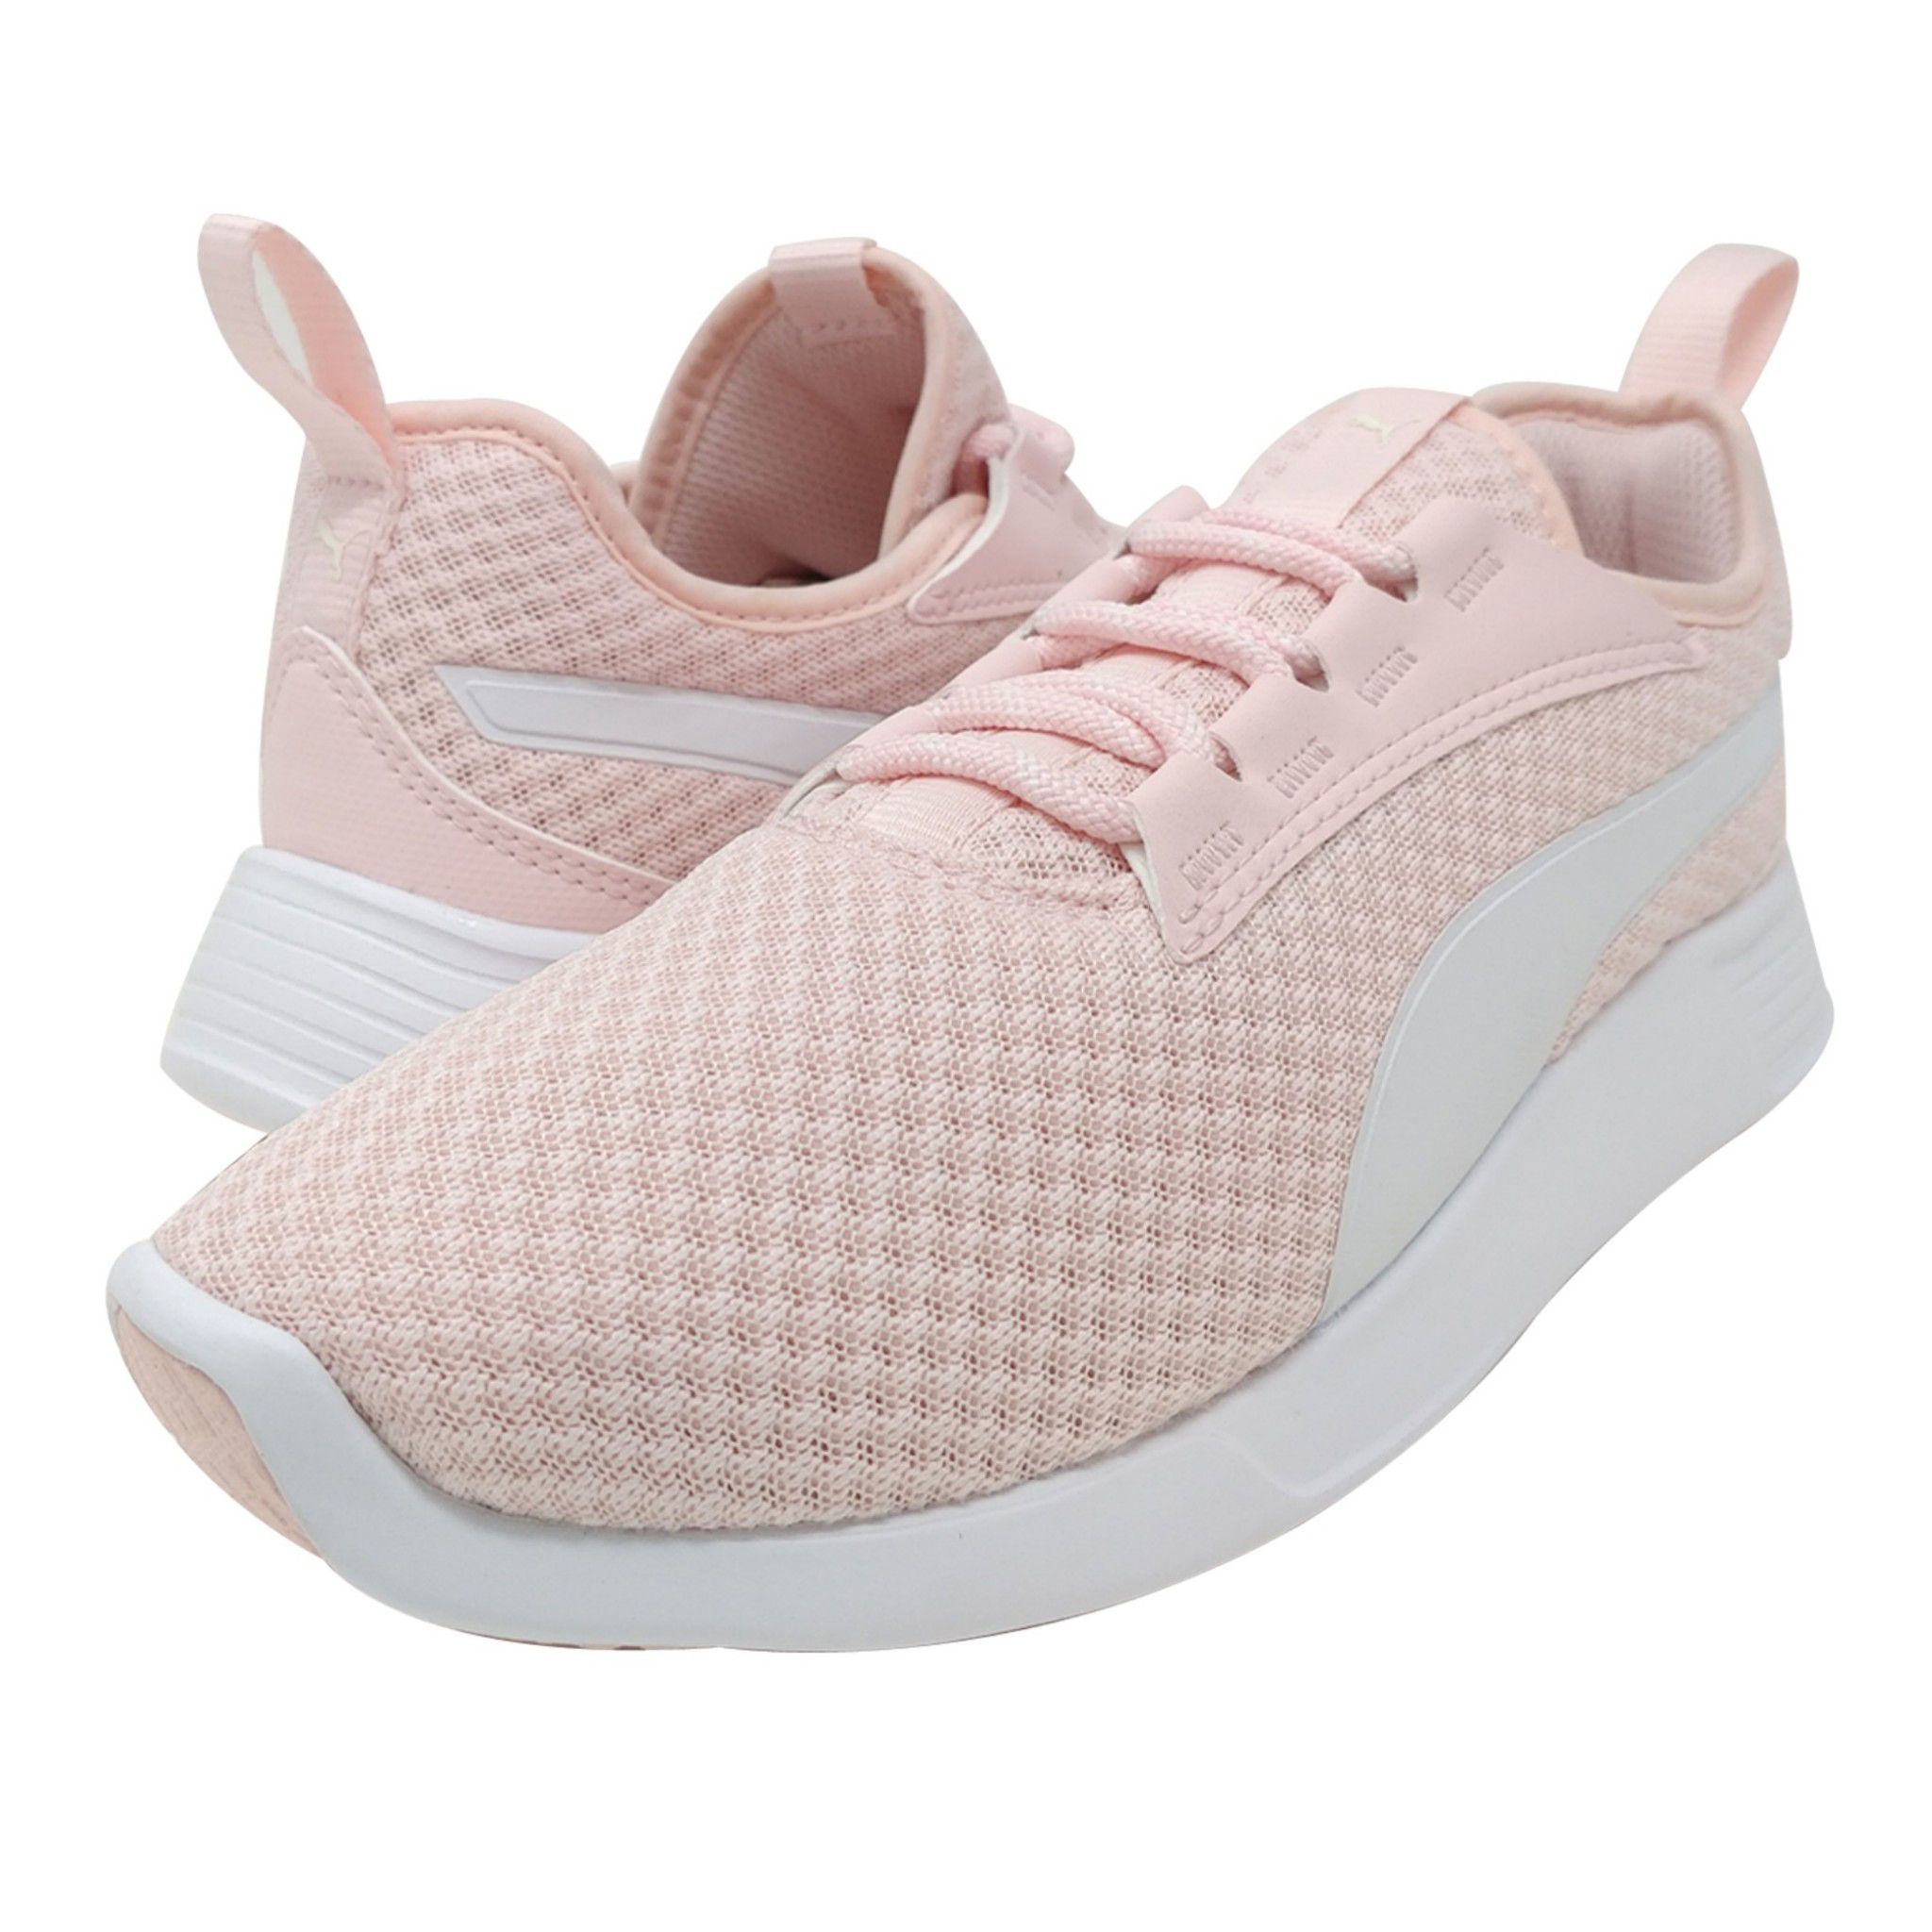 Puma Pink Training Shoes Price in India- Buy Puma Pink Training Shoes ...